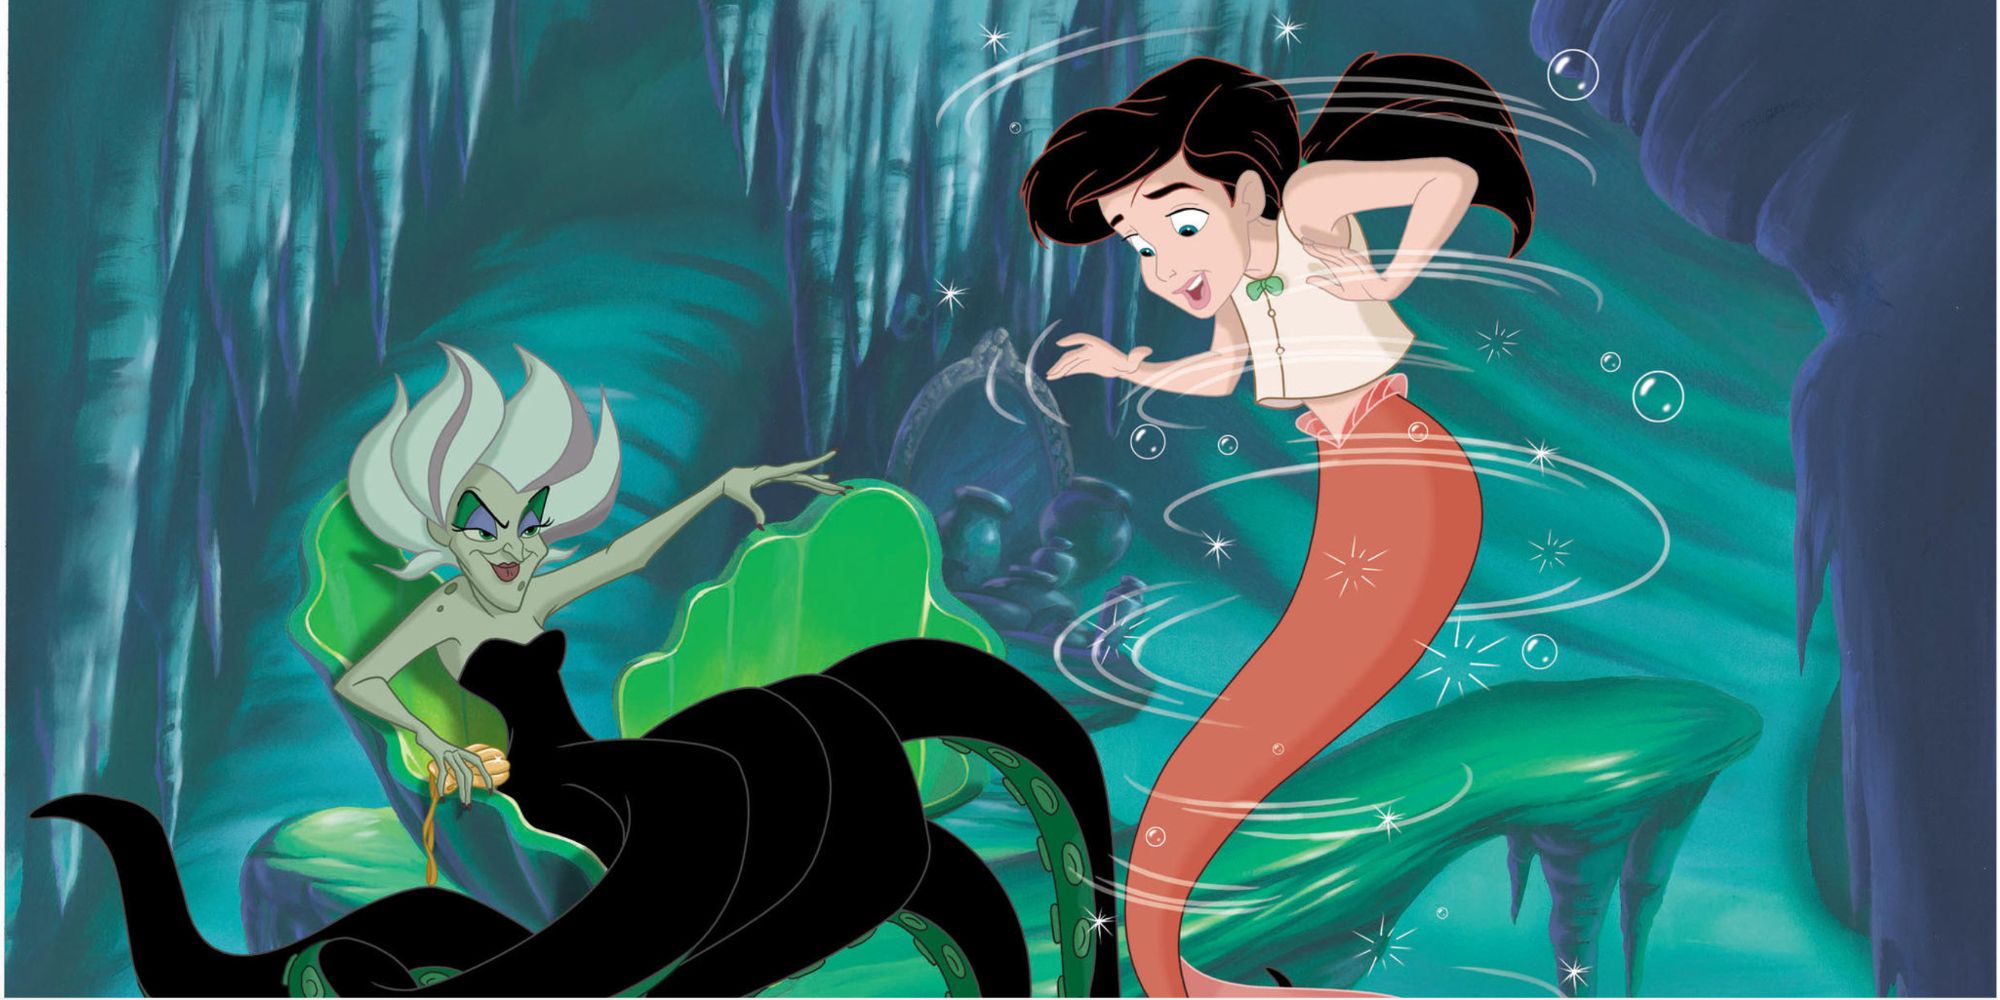 Morgana and Melody in The Little Mermaid II: Return to the Sea